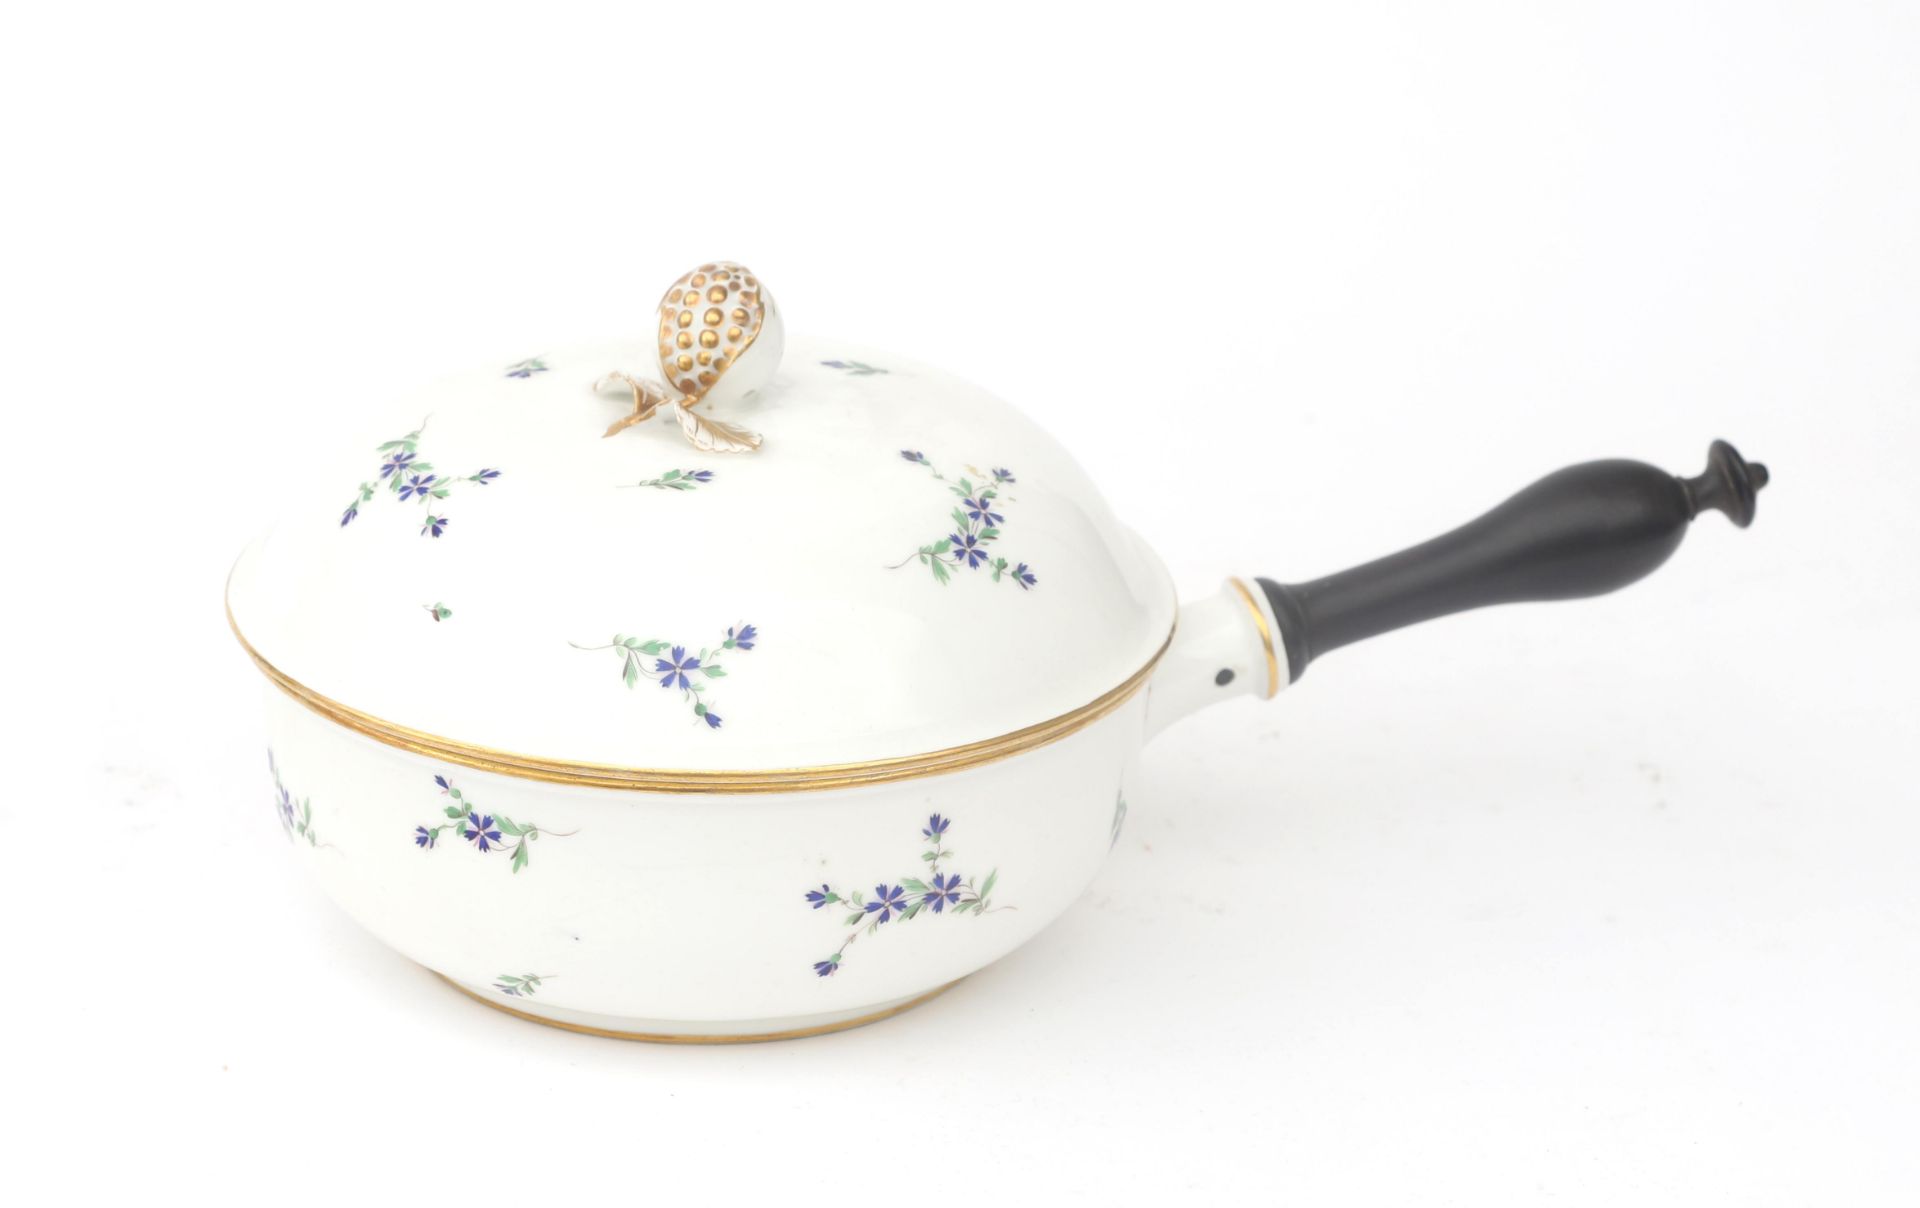 A porcelain casserole with wooden handle and 'Barbeau' motif, Paris, France, late 18th / early 19th